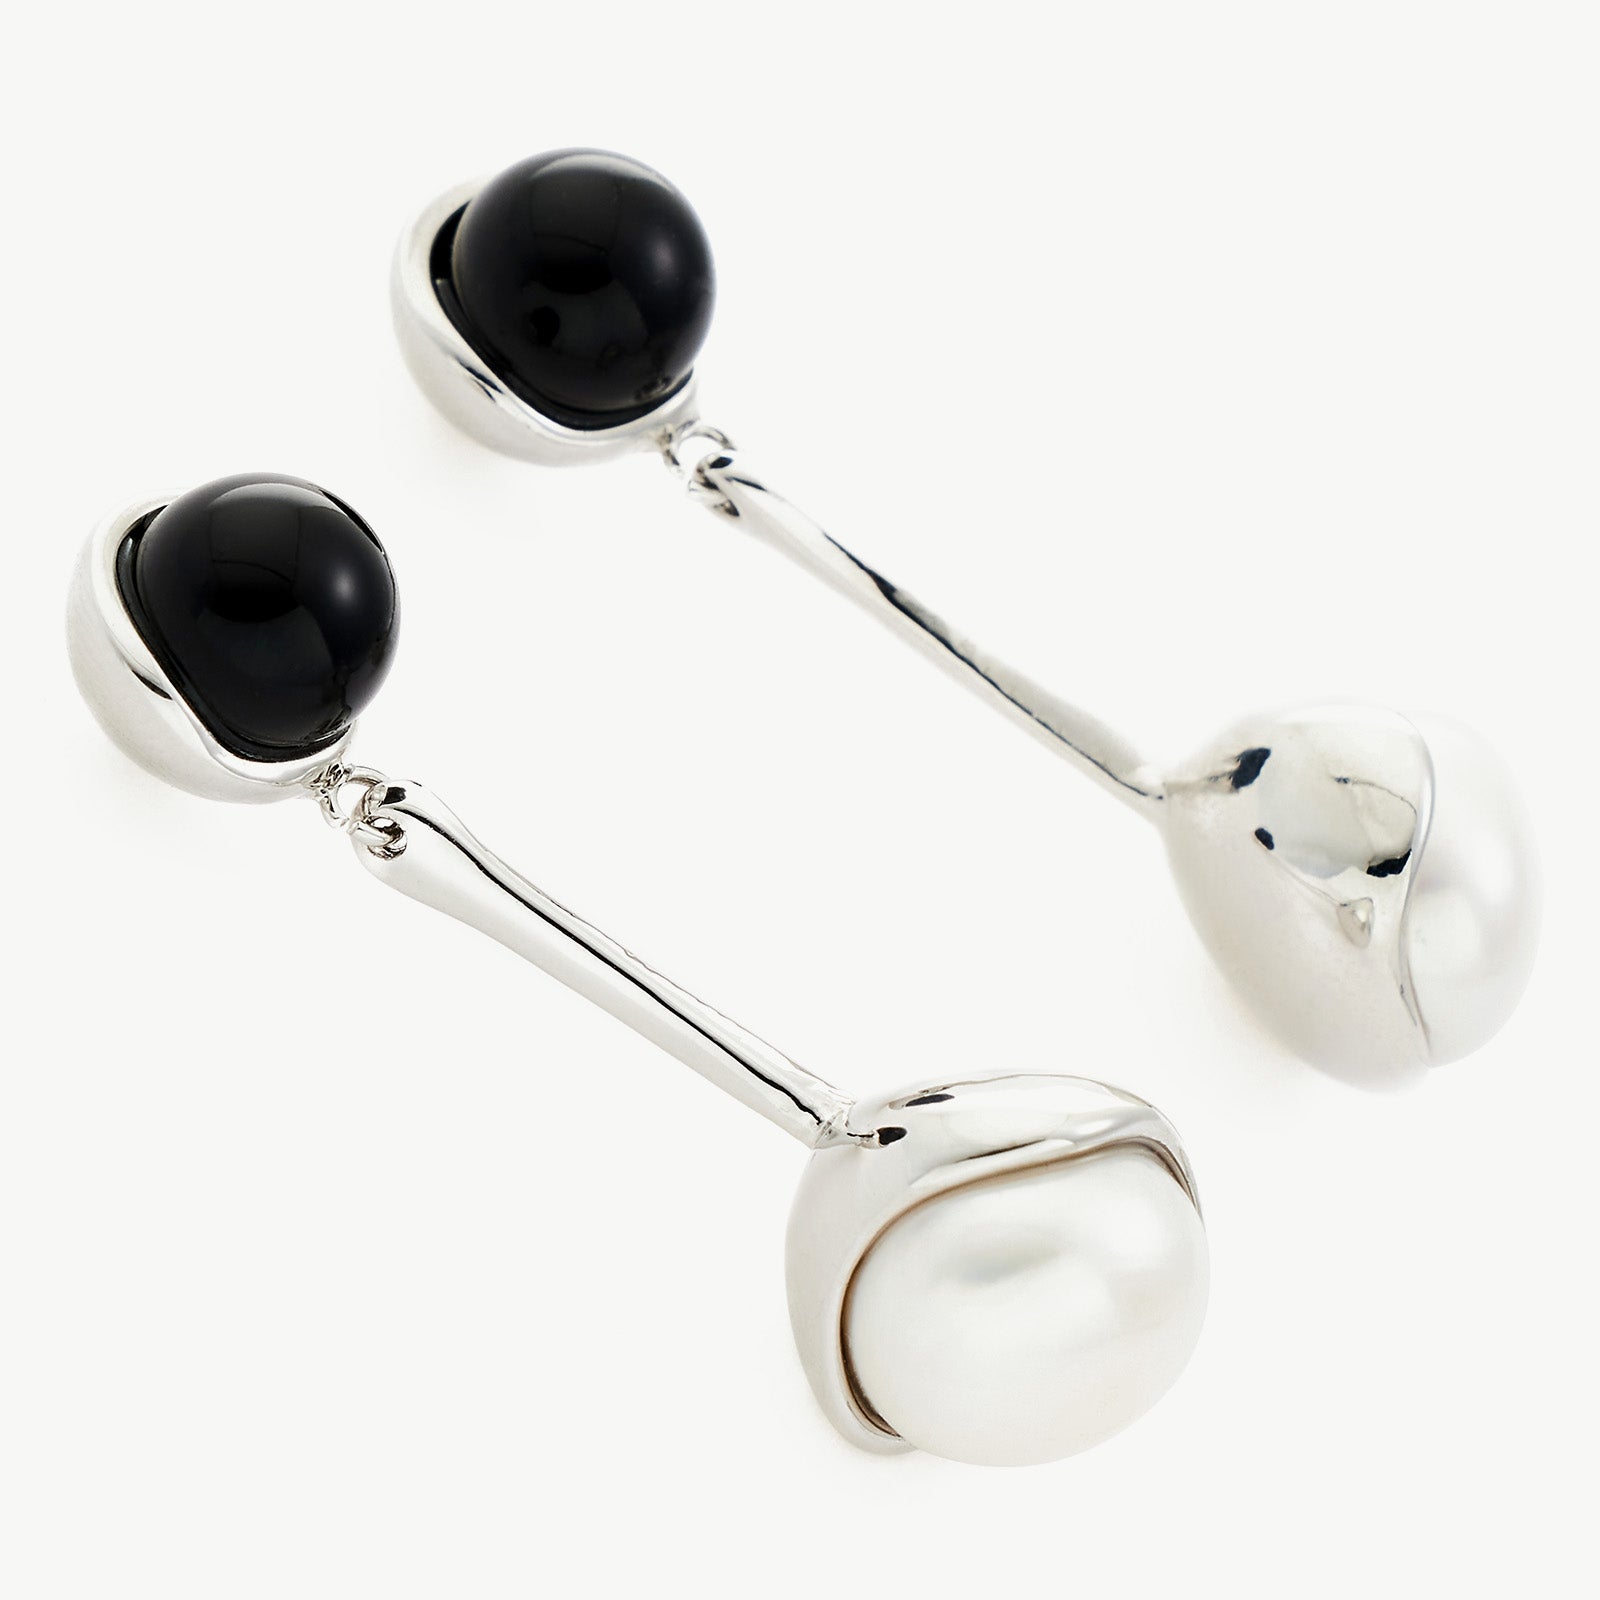 Silver Agate and Pearl Charm Earrings featuring sculpted charm details, these hoops provide a unique and artistic charm, capturing attention with their intricate design.